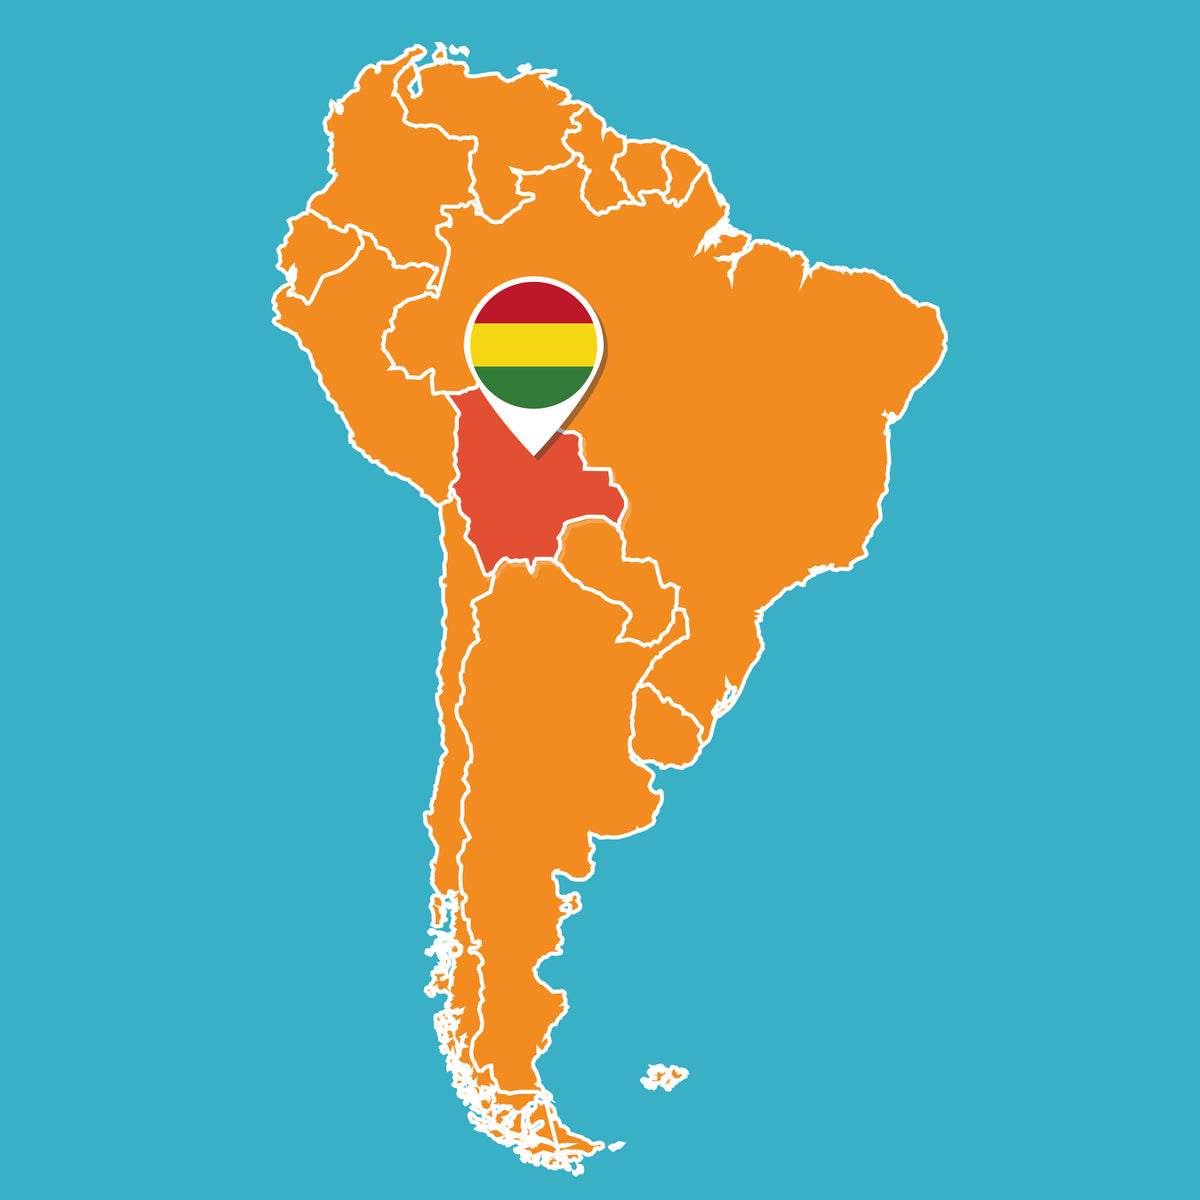 Image of South America on a map